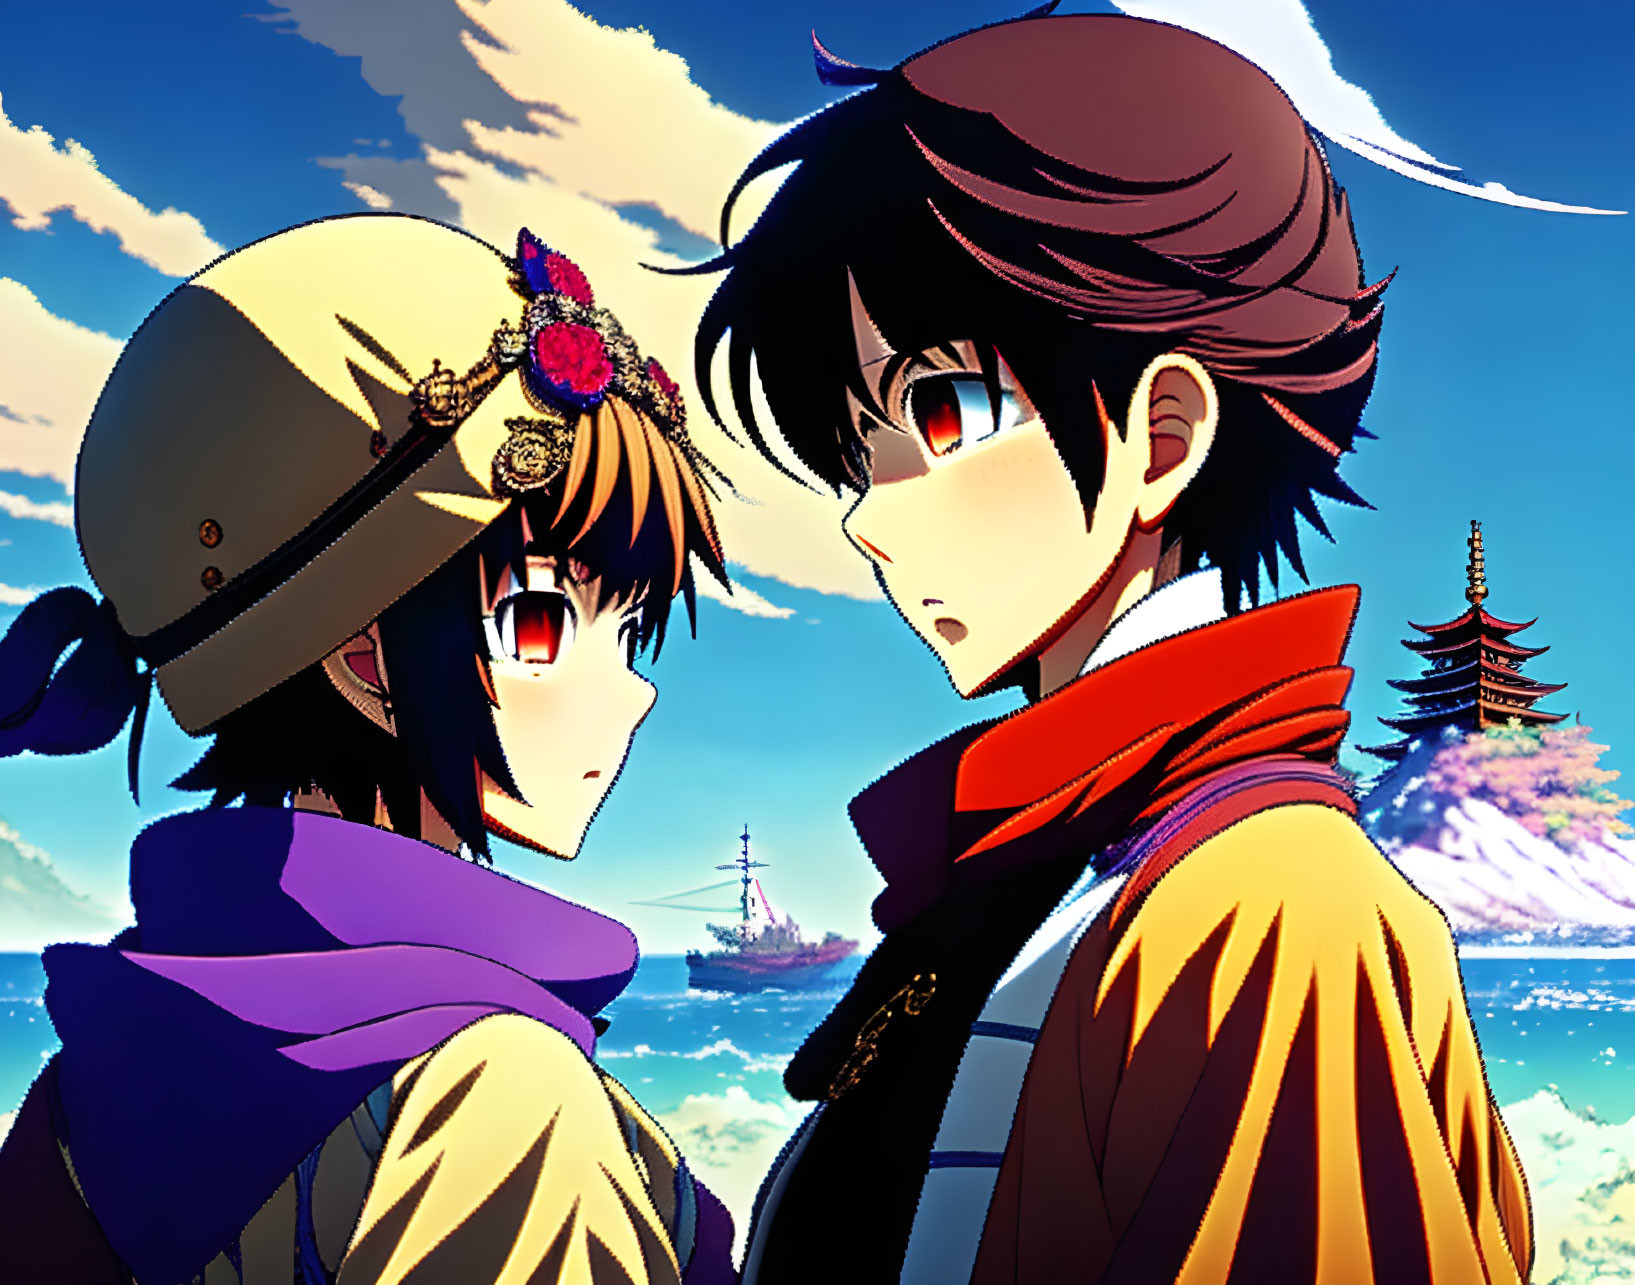 Anime characters with intense gazes in military cap and red scarf by seaside with ship and pagoda.